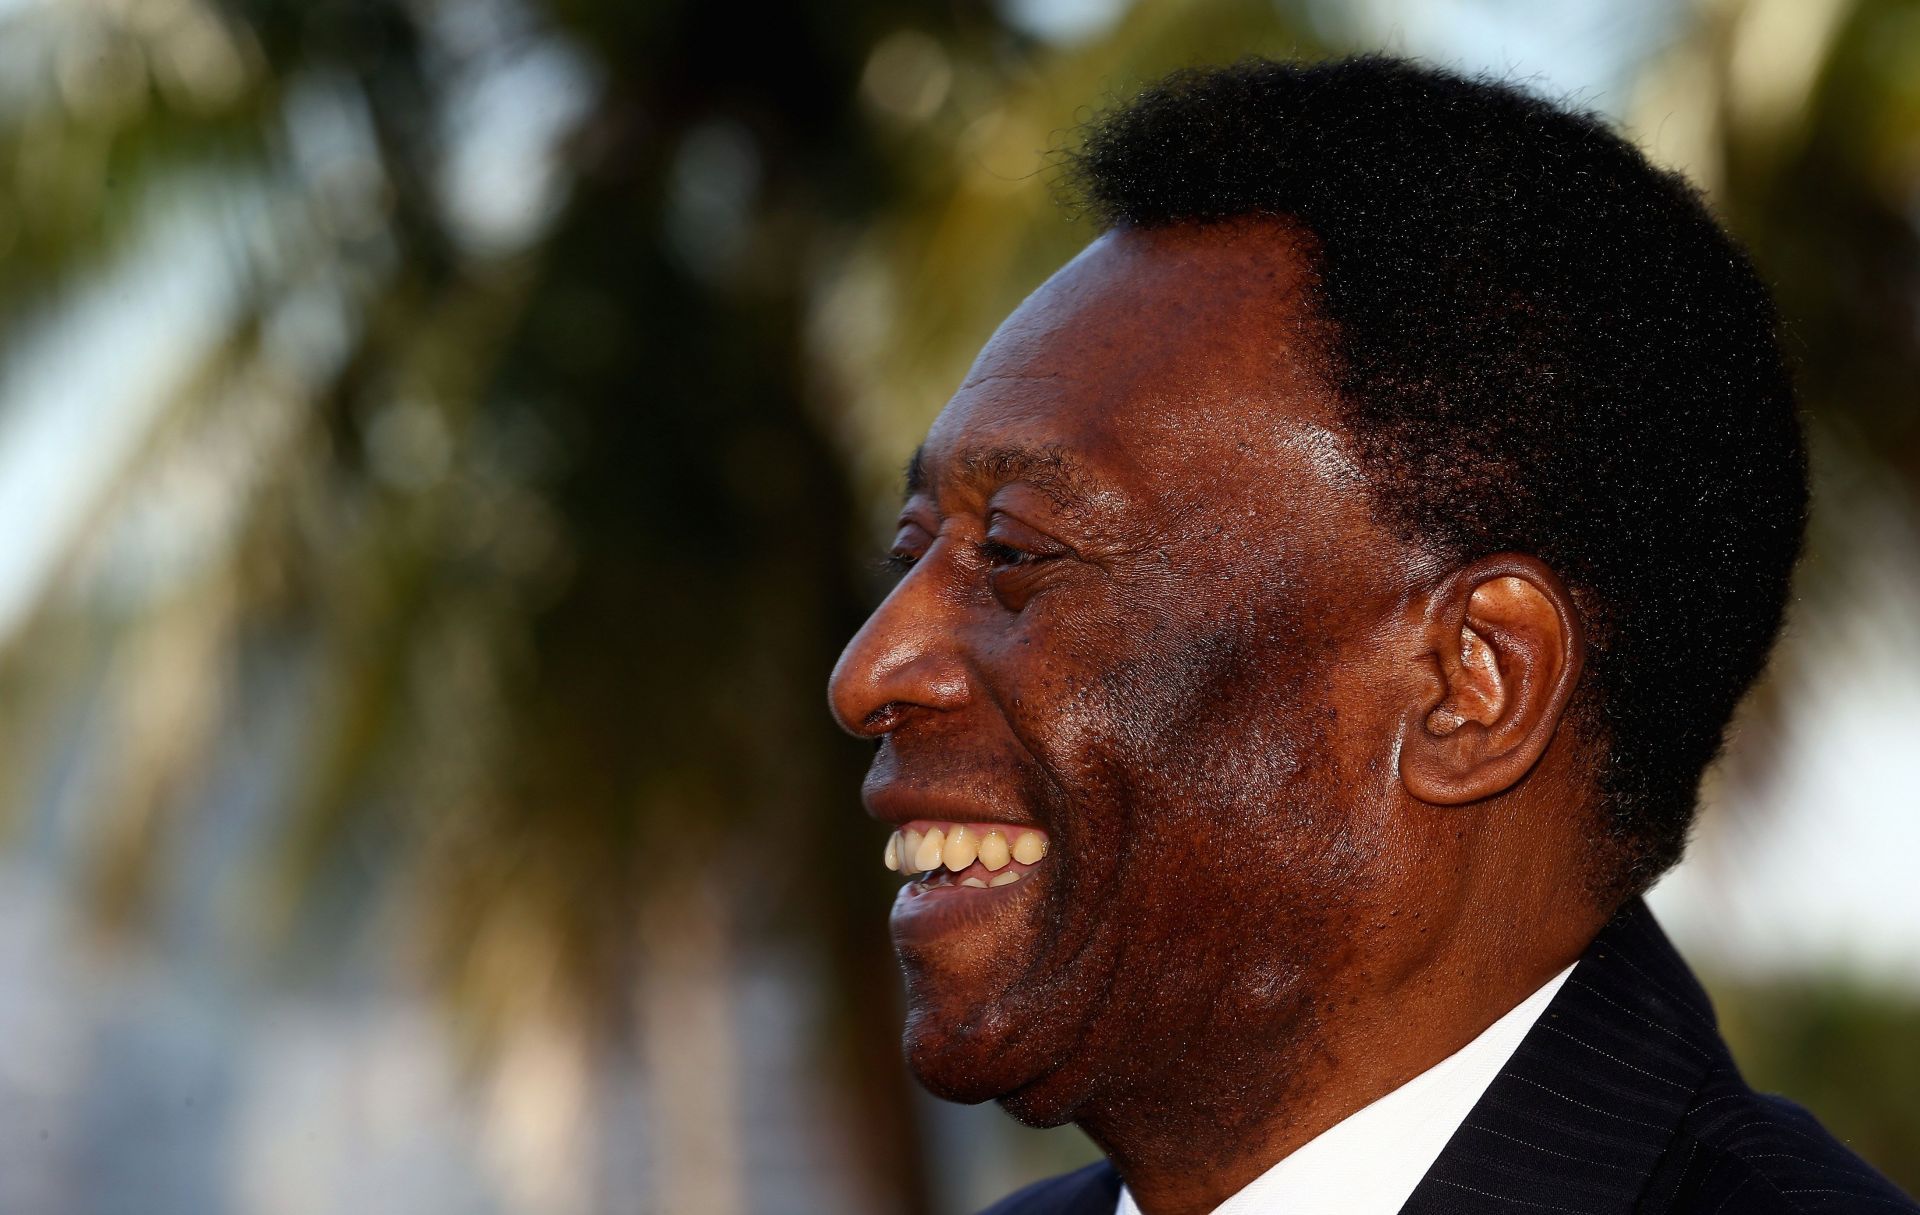 Pele had nothing but magic on his feet